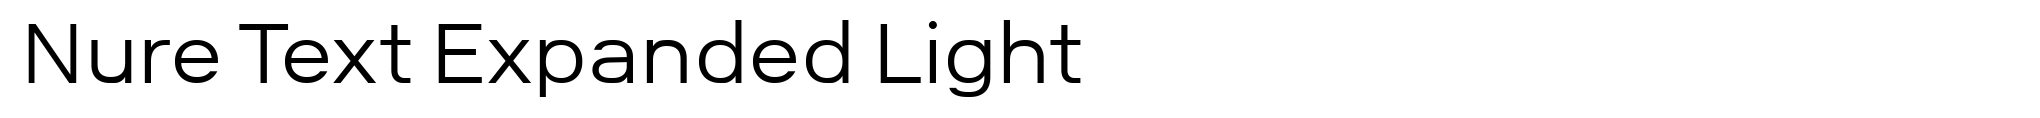 Nure Text Expanded Light image